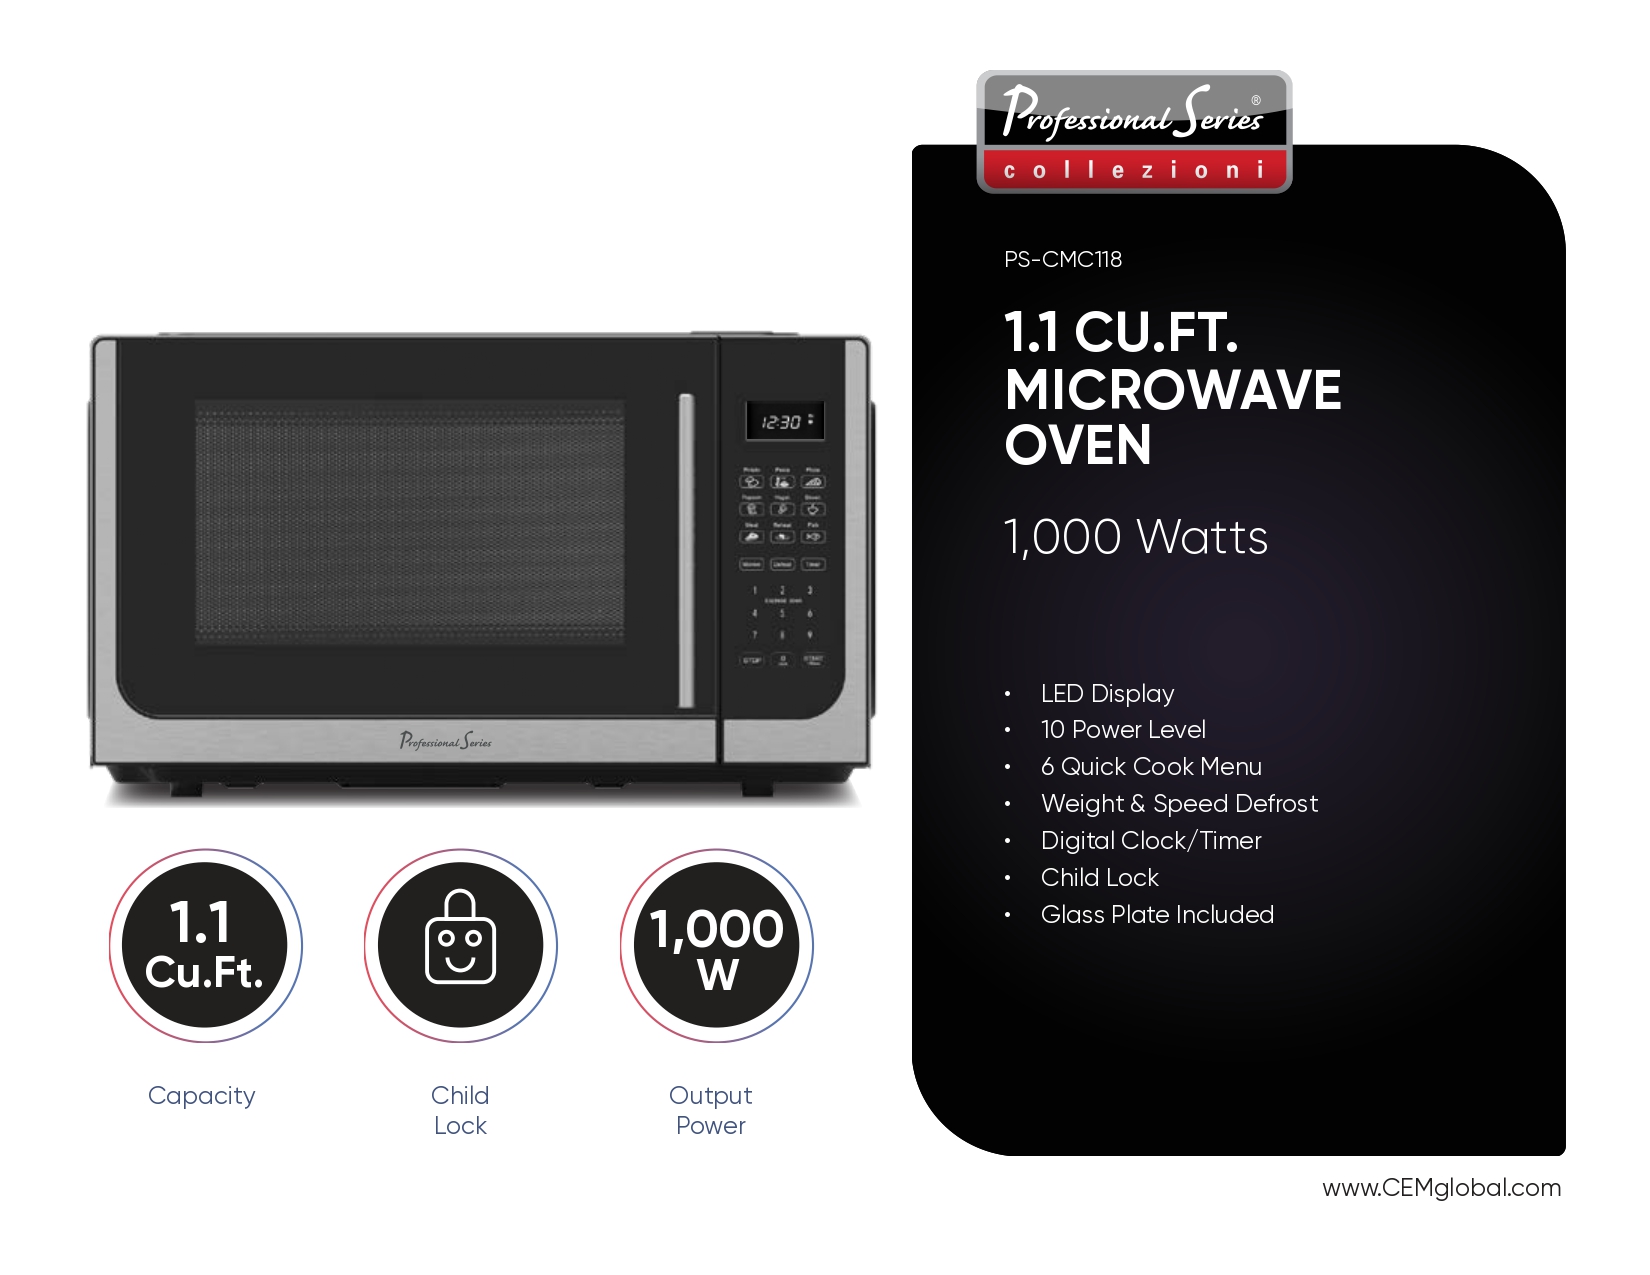 1.1 CU.FT. MICROWAVE OVEN